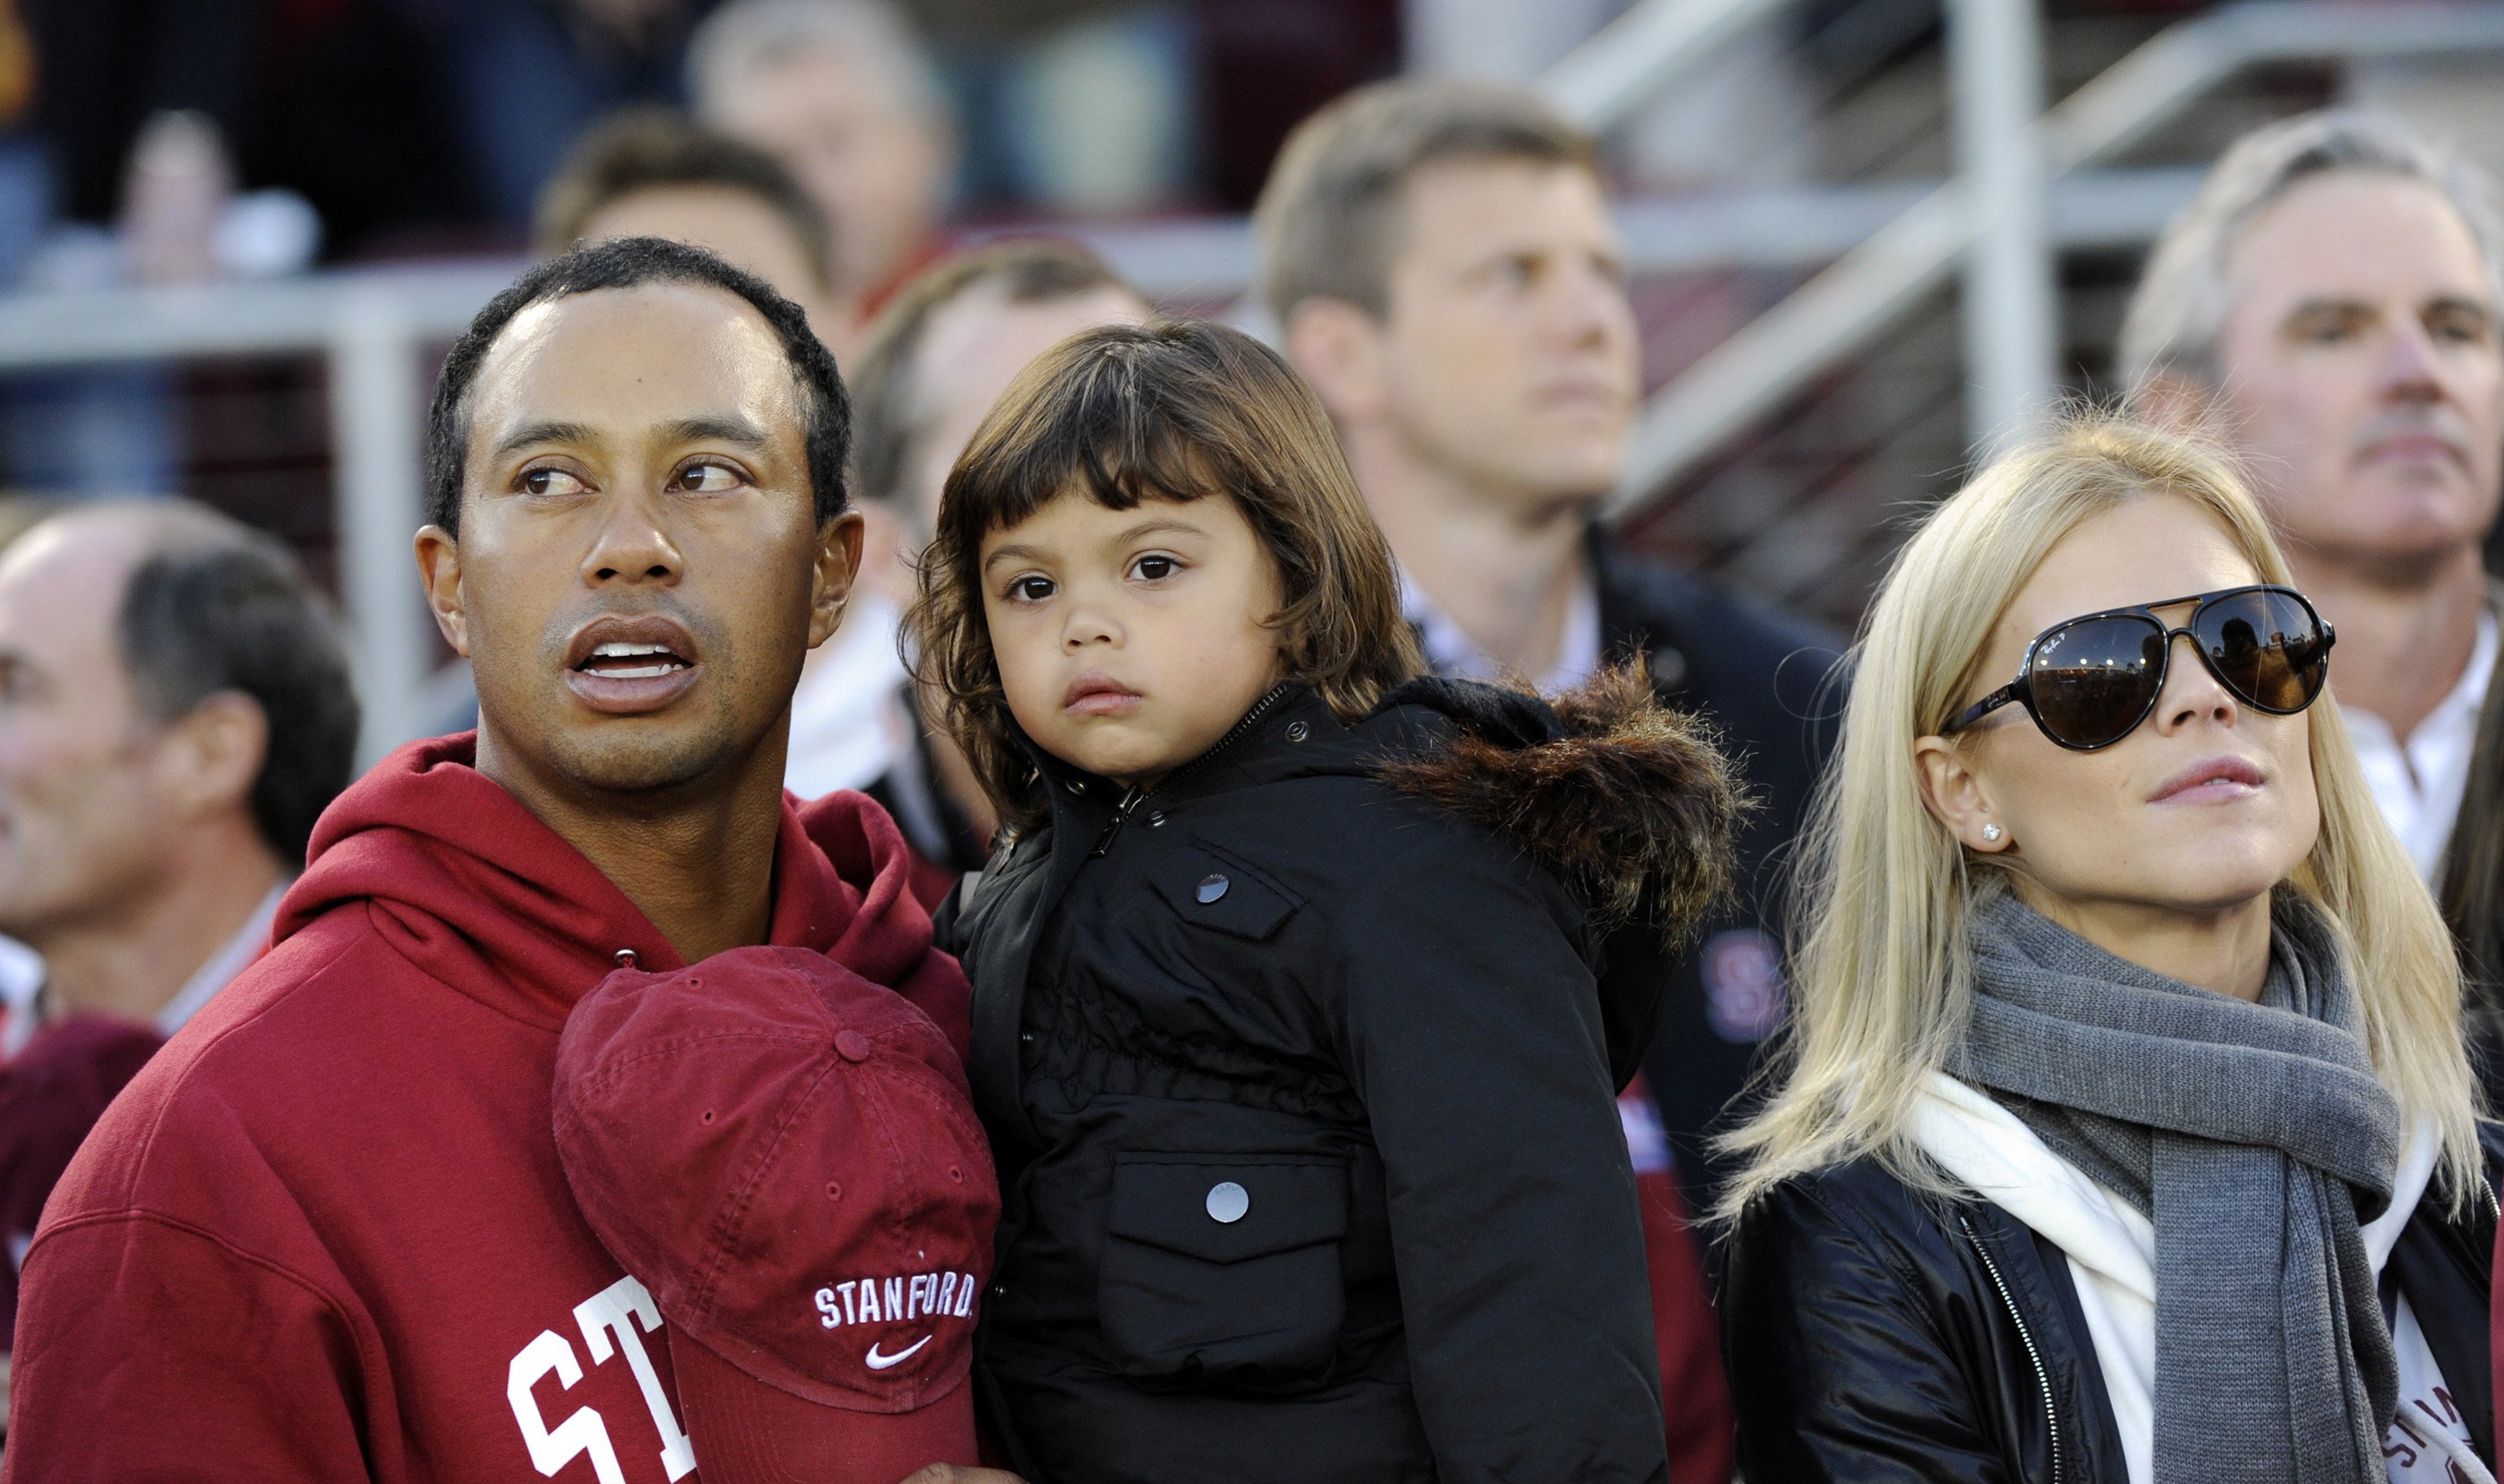 Tiger Woods pictured with daughter Sam Alexis Woods, and wife Elin Woods on sidelines during an NCAA football game at Stanford Stadium, Stanford, California. | Source: Getty Images